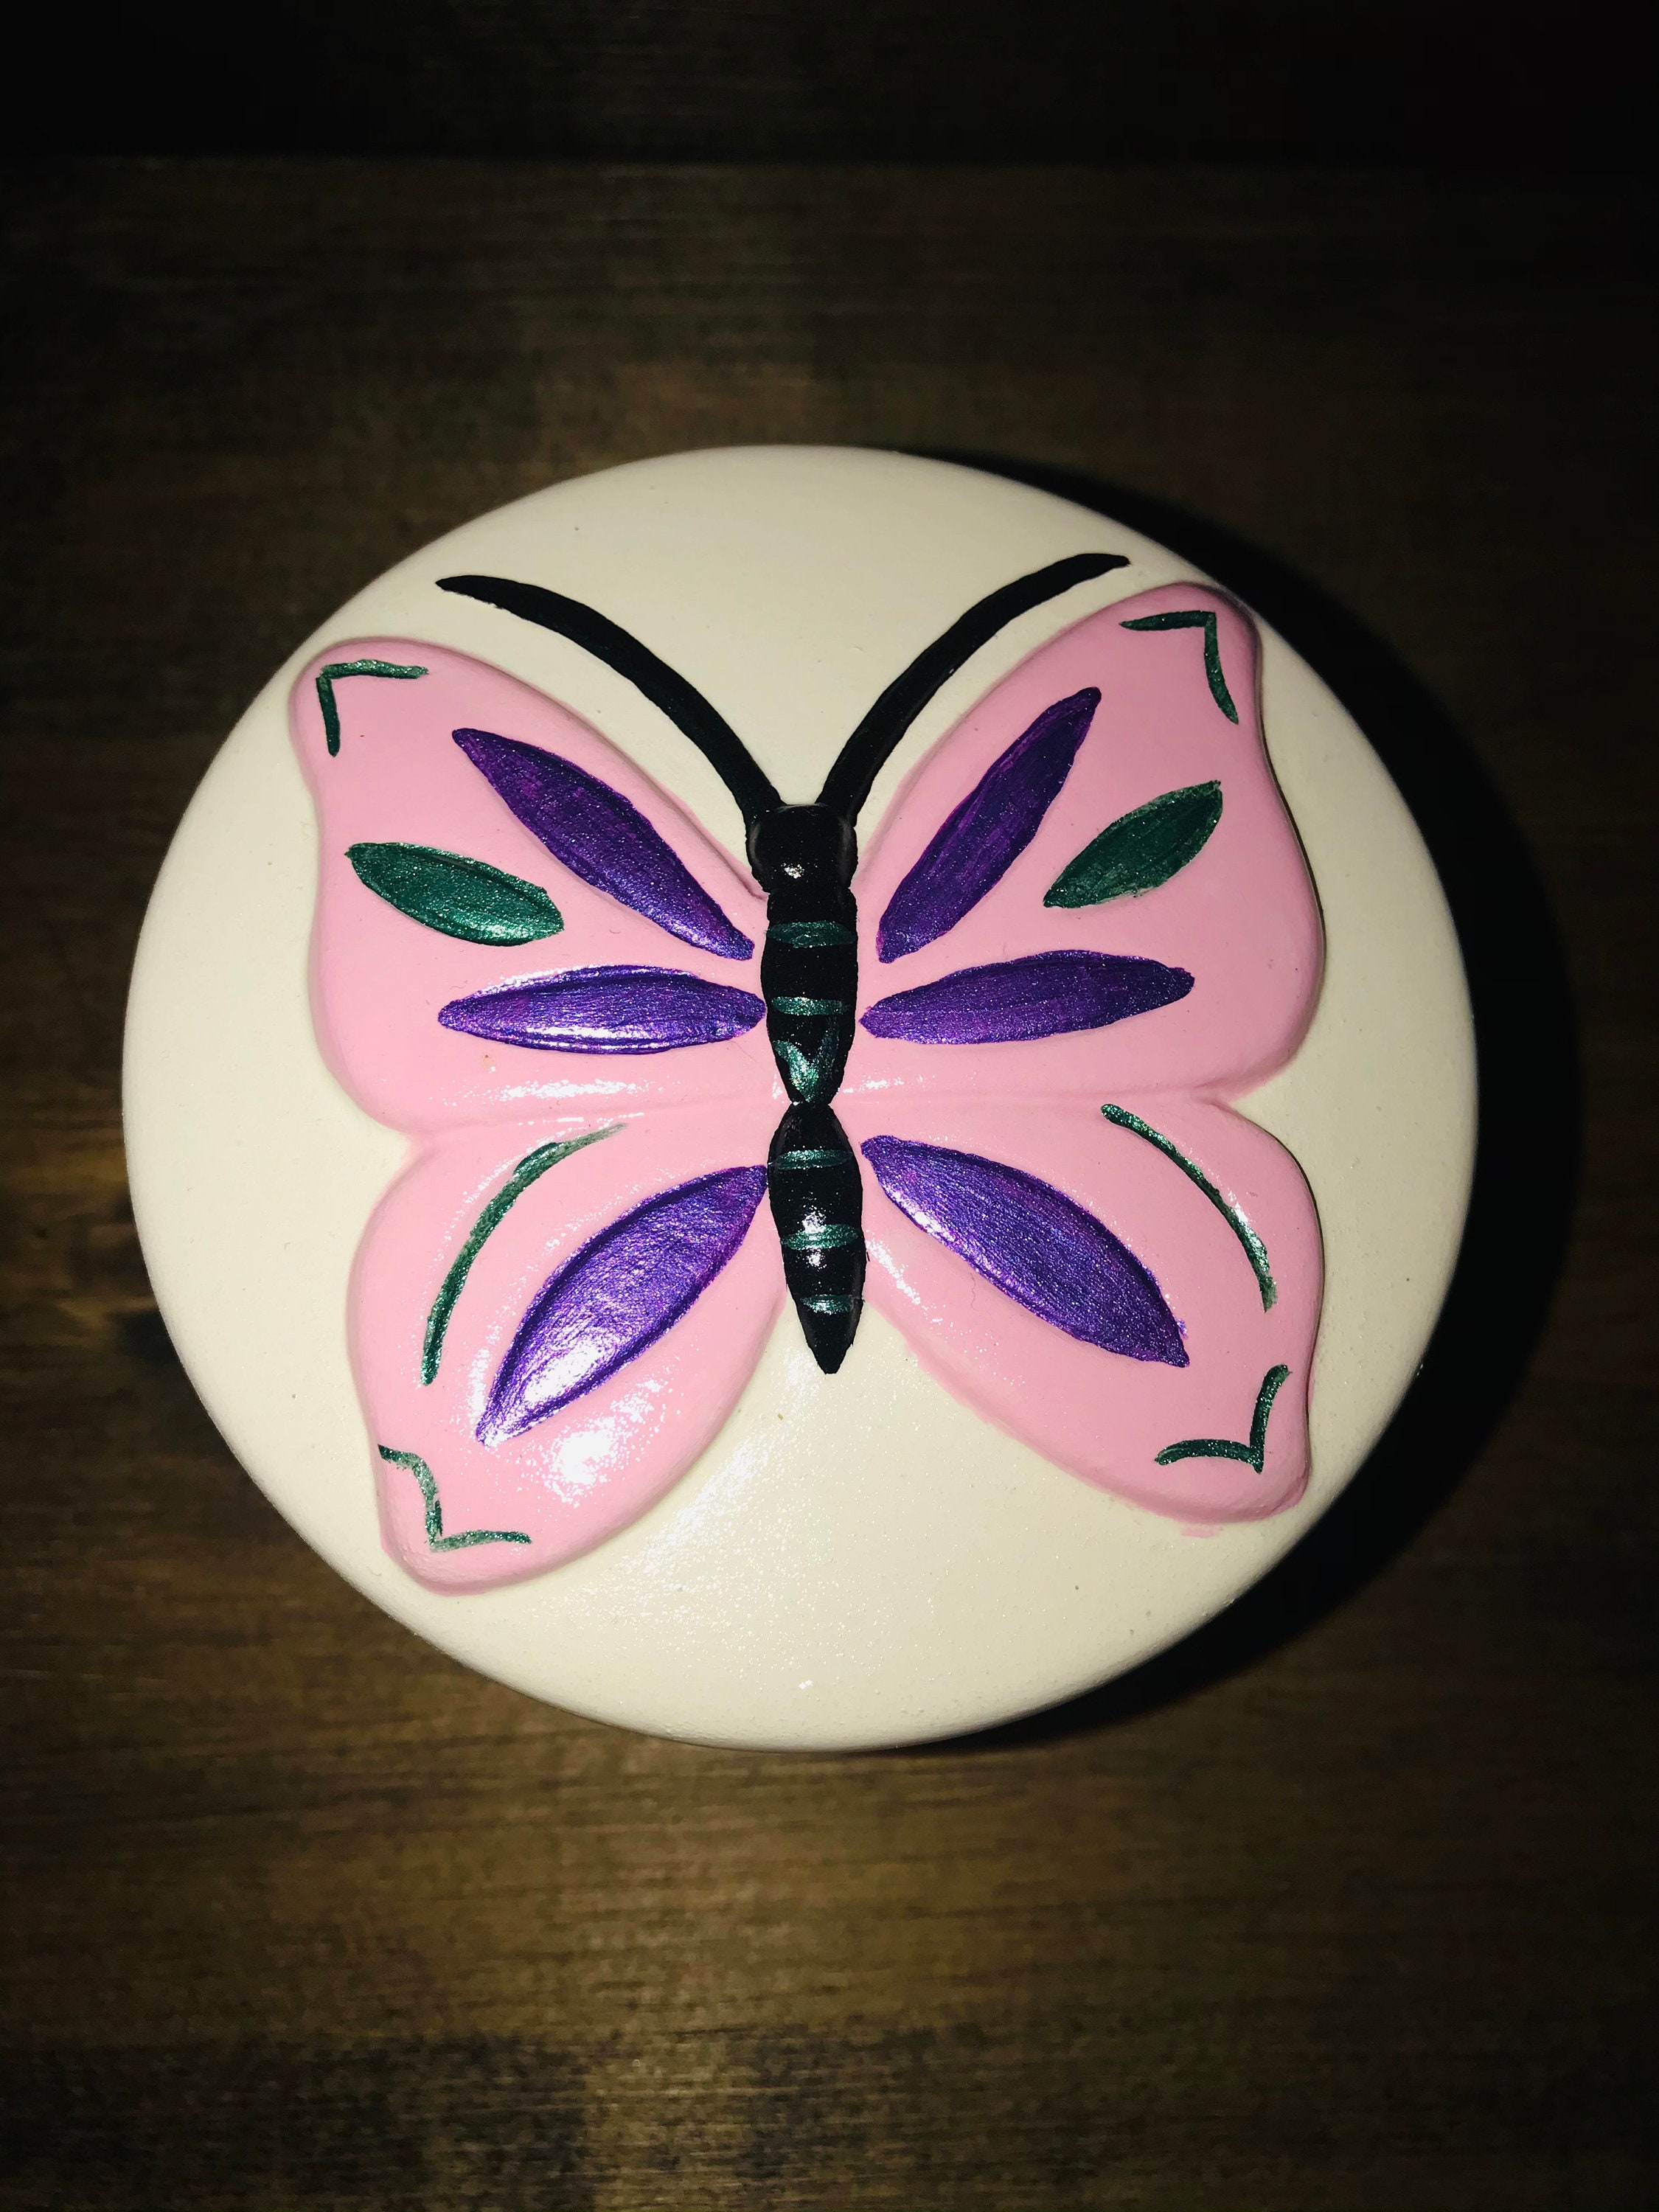 Birthday Gift For Girl Keepsake Box Gift Gift For Her Jewelry Box Personalized Box Granddaughter Gifts Gift For Daughter Butterfly